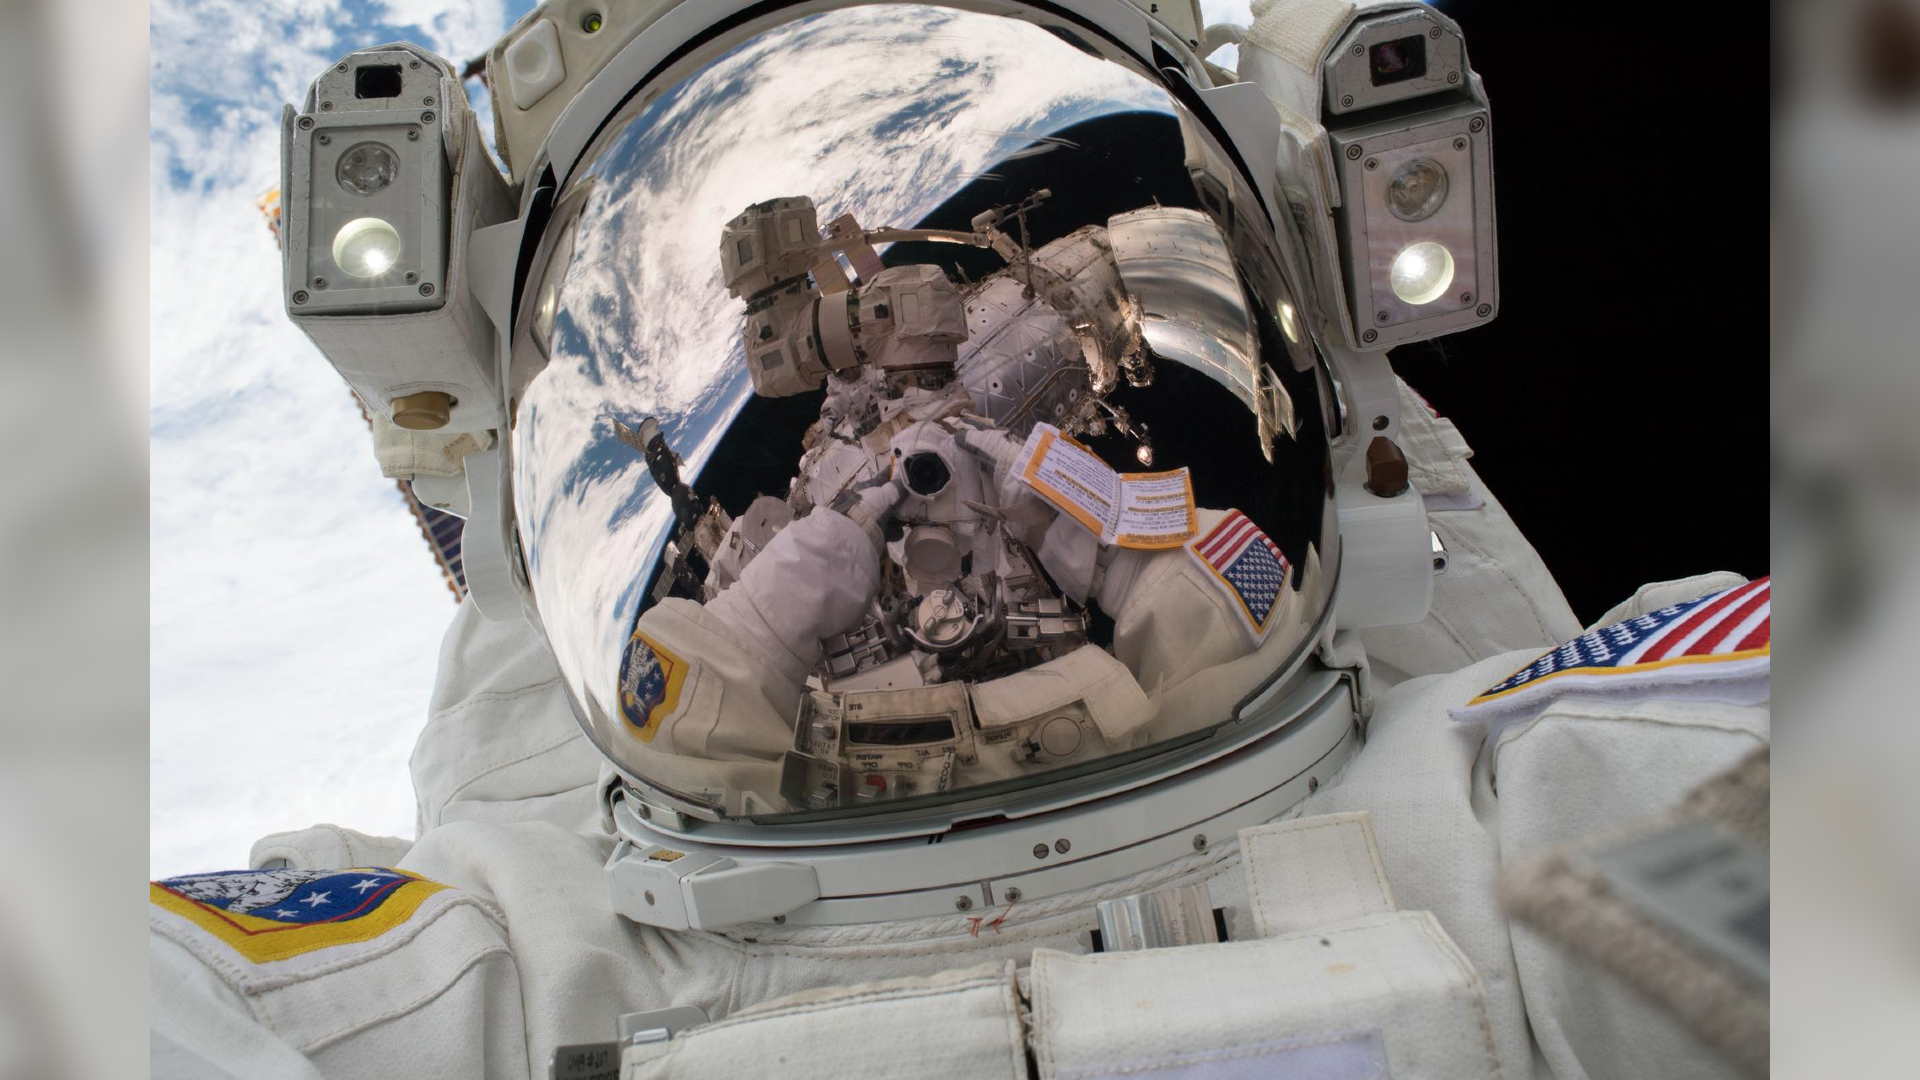 Close up of astronaut visor reflecting Earth in the background and the camera being used to capture the selfie.